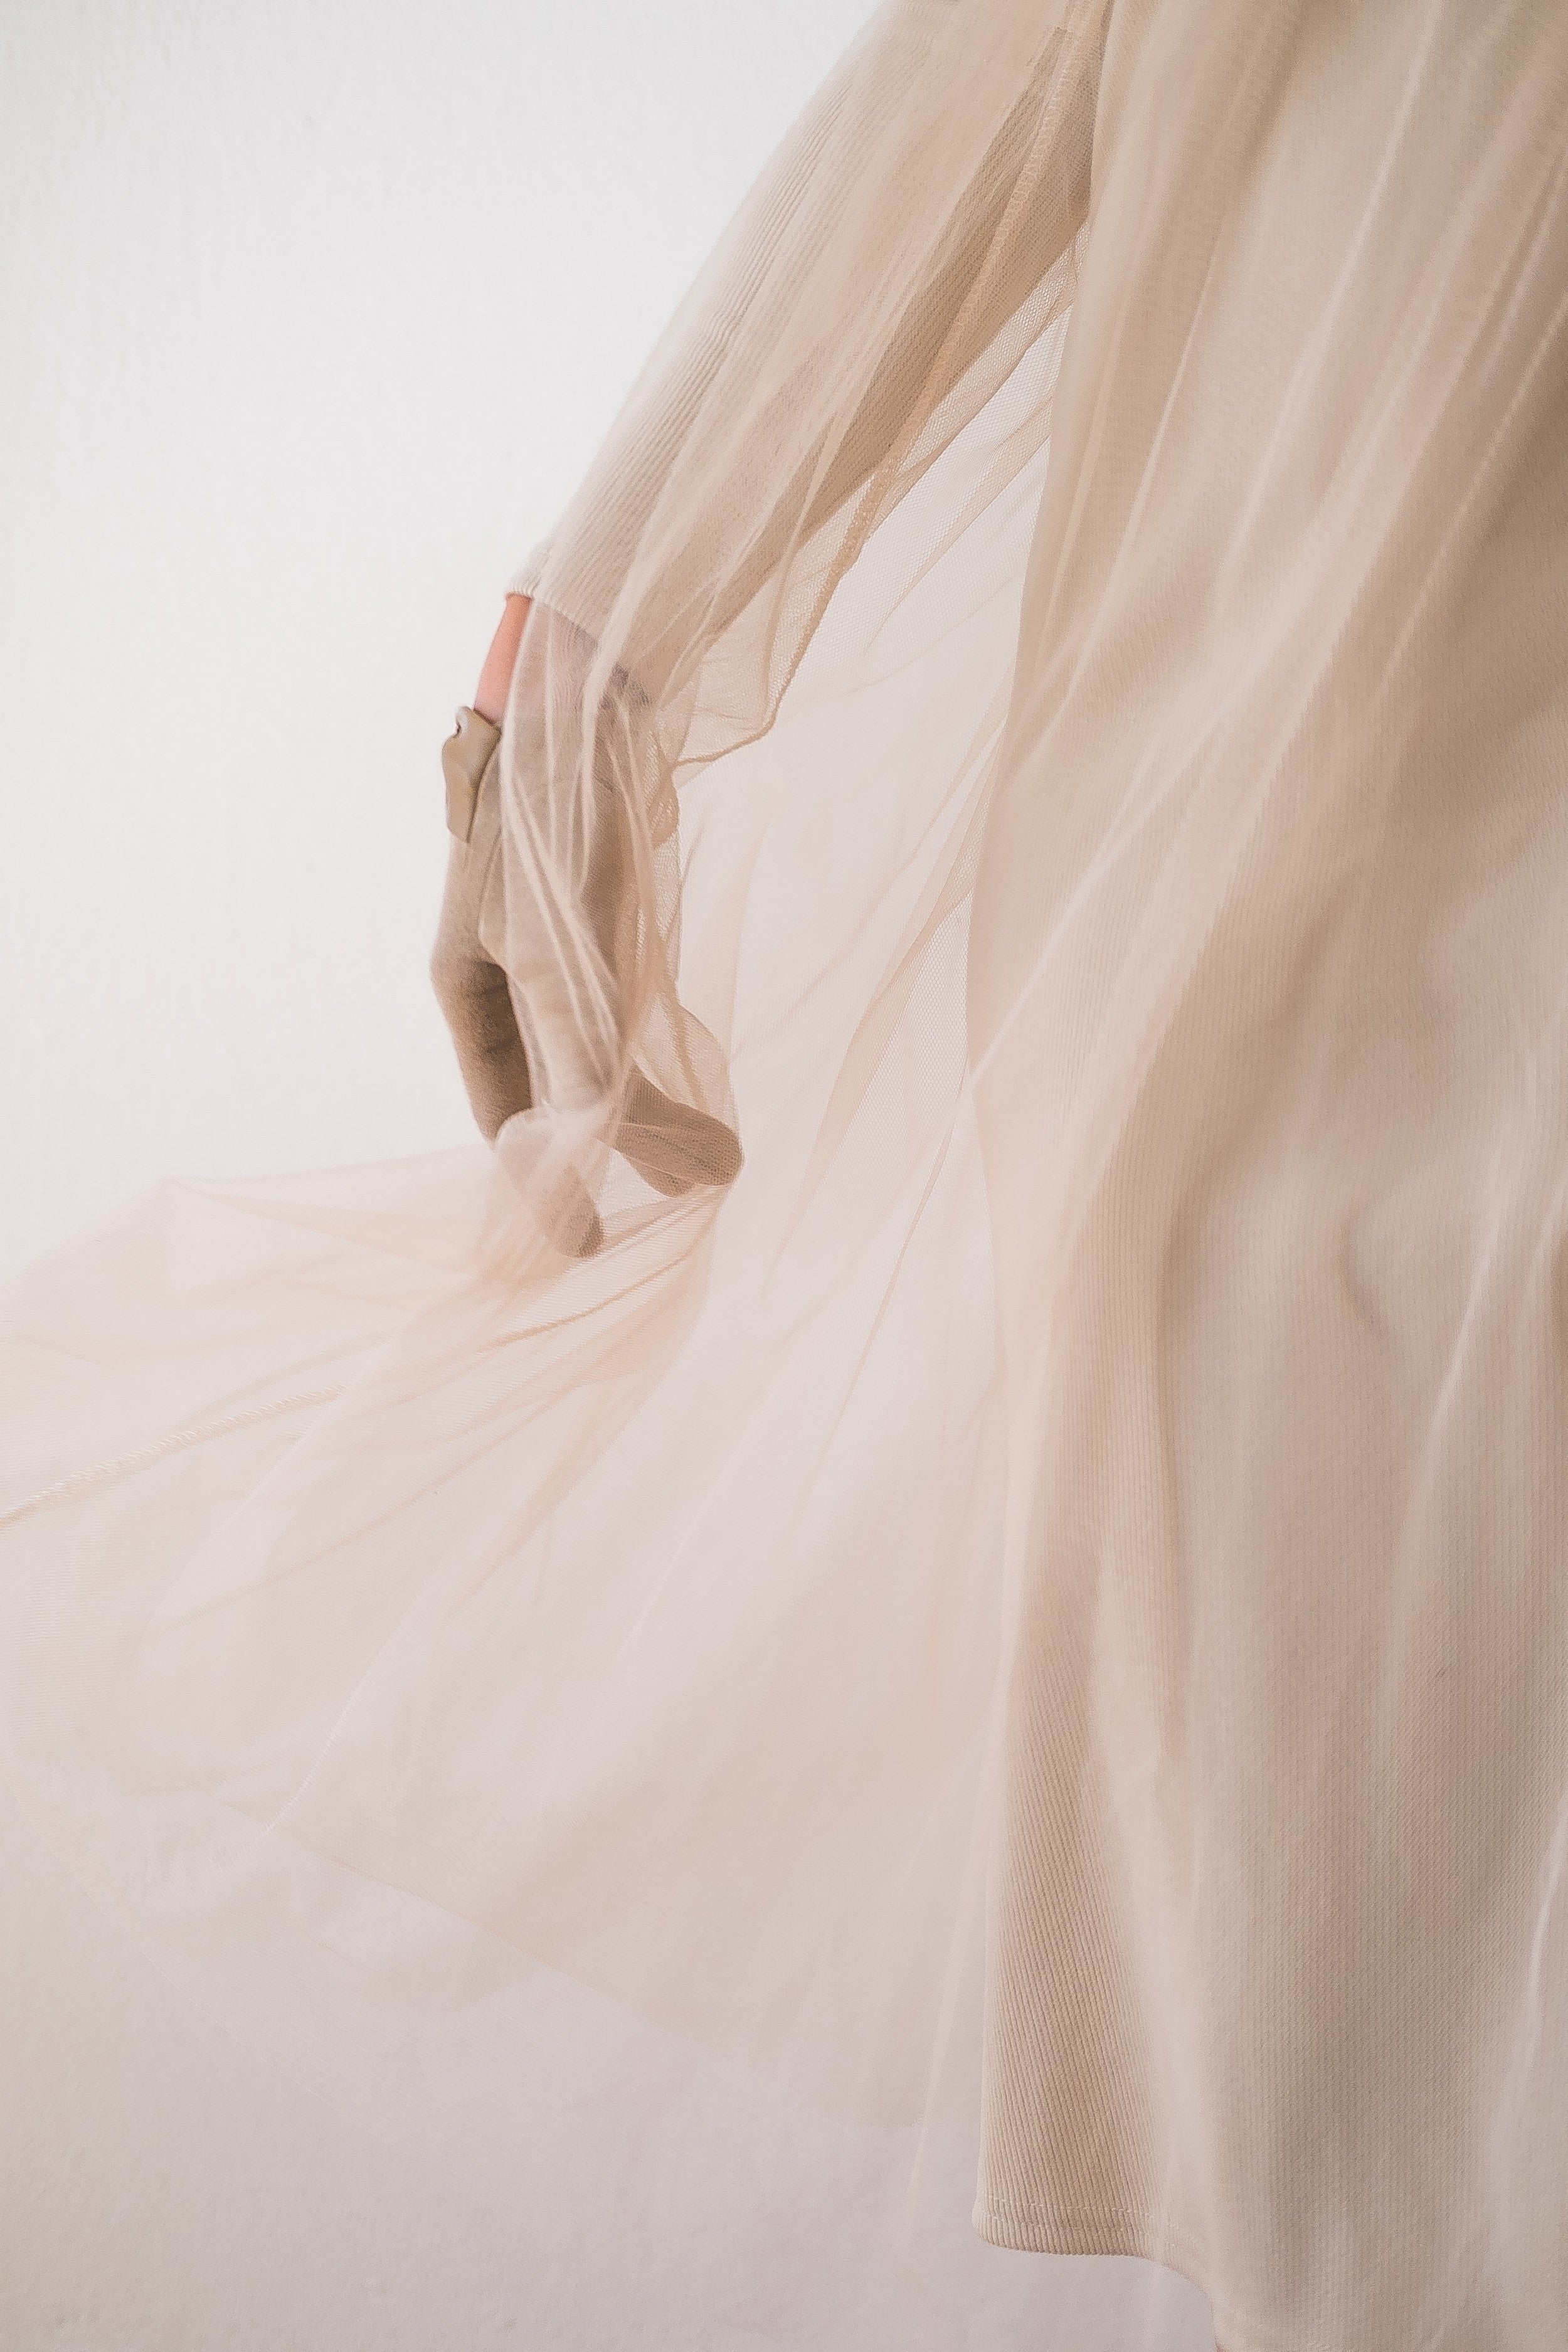 a woman's hand slightly visible through a thin beige see-through fabric.